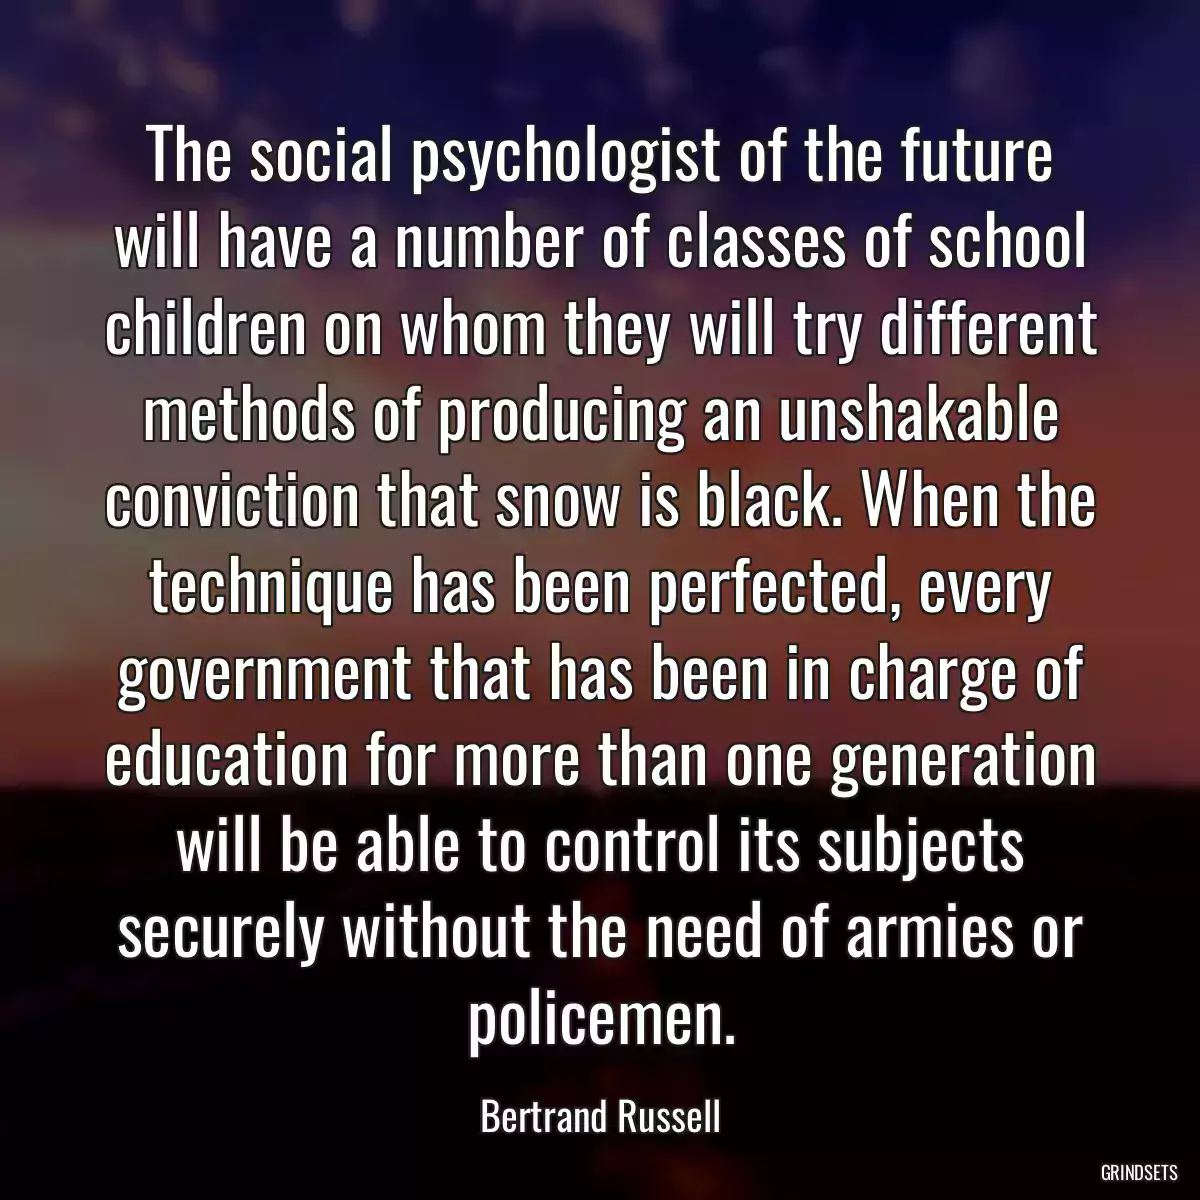 The social psychologist of the future will have a number of classes of school children on whom they will try different methods of producing an unshakable conviction that snow is black. When the technique has been perfected, every government that has been in charge of education for more than one generation will be able to control its subjects securely without the need of armies or policemen.